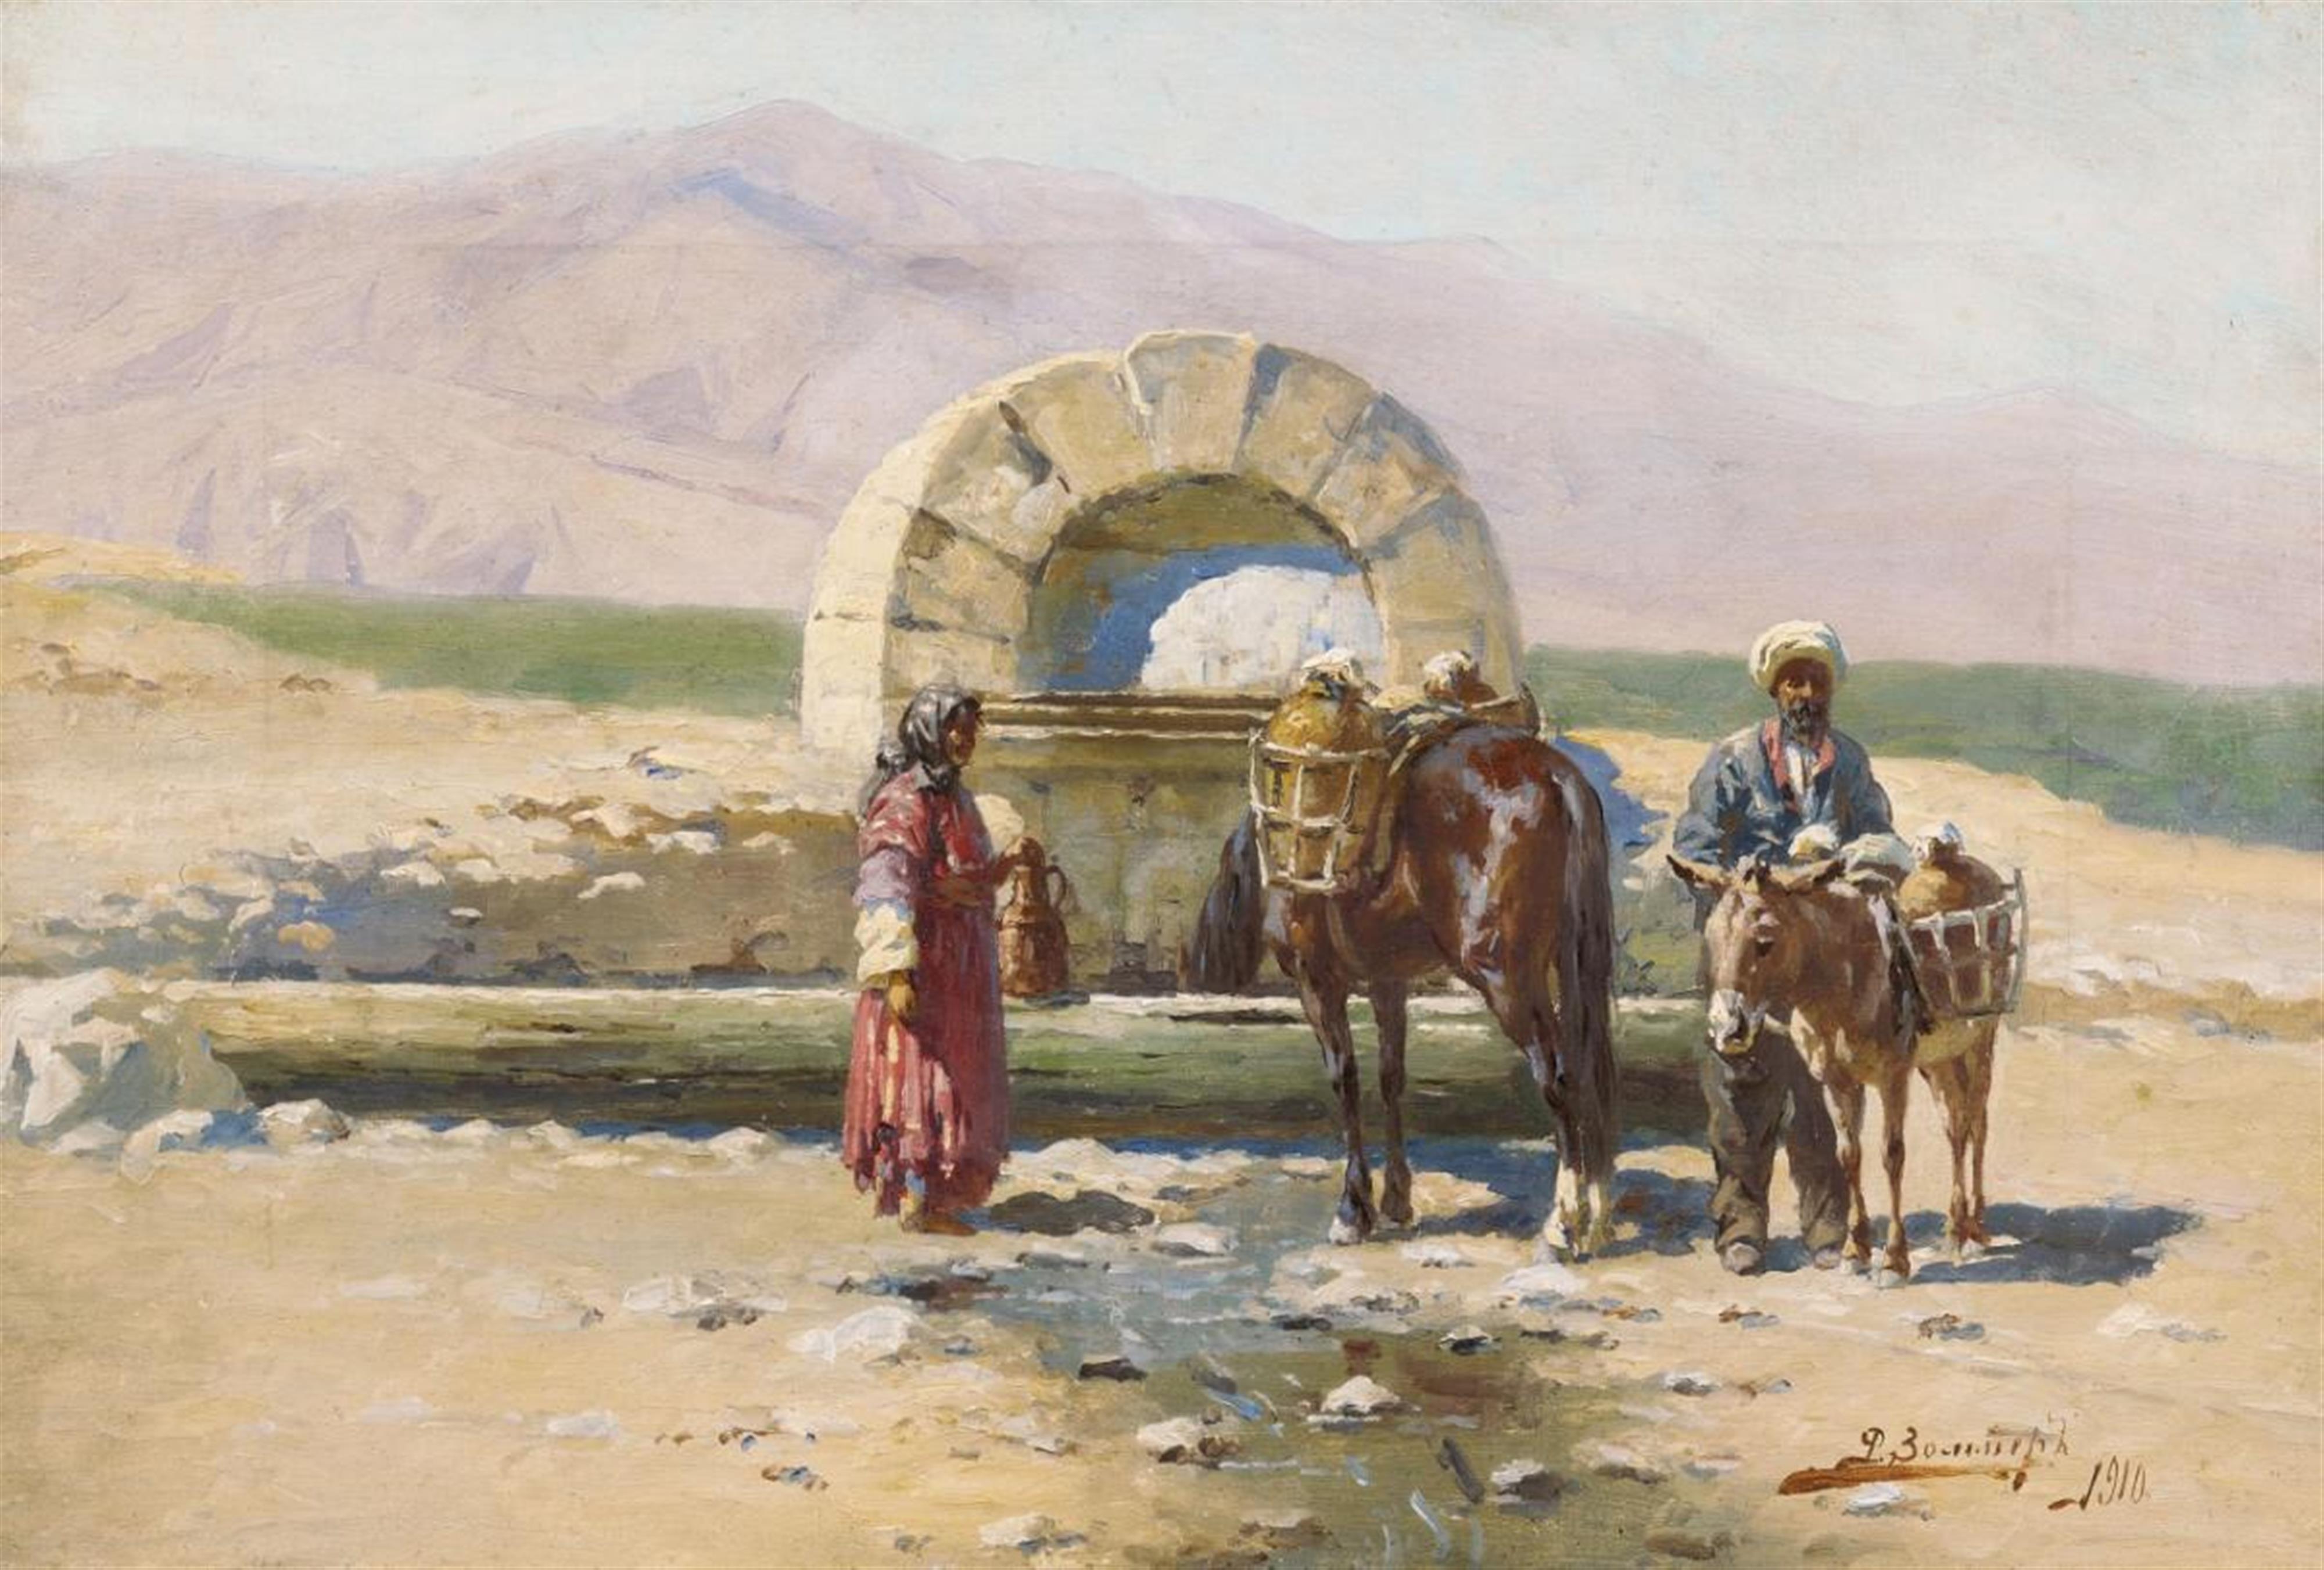 Richard Karlovich Zommer - LANDSCAPE IN THE CAUCASUS WITH HORSE TROUGH - image-1